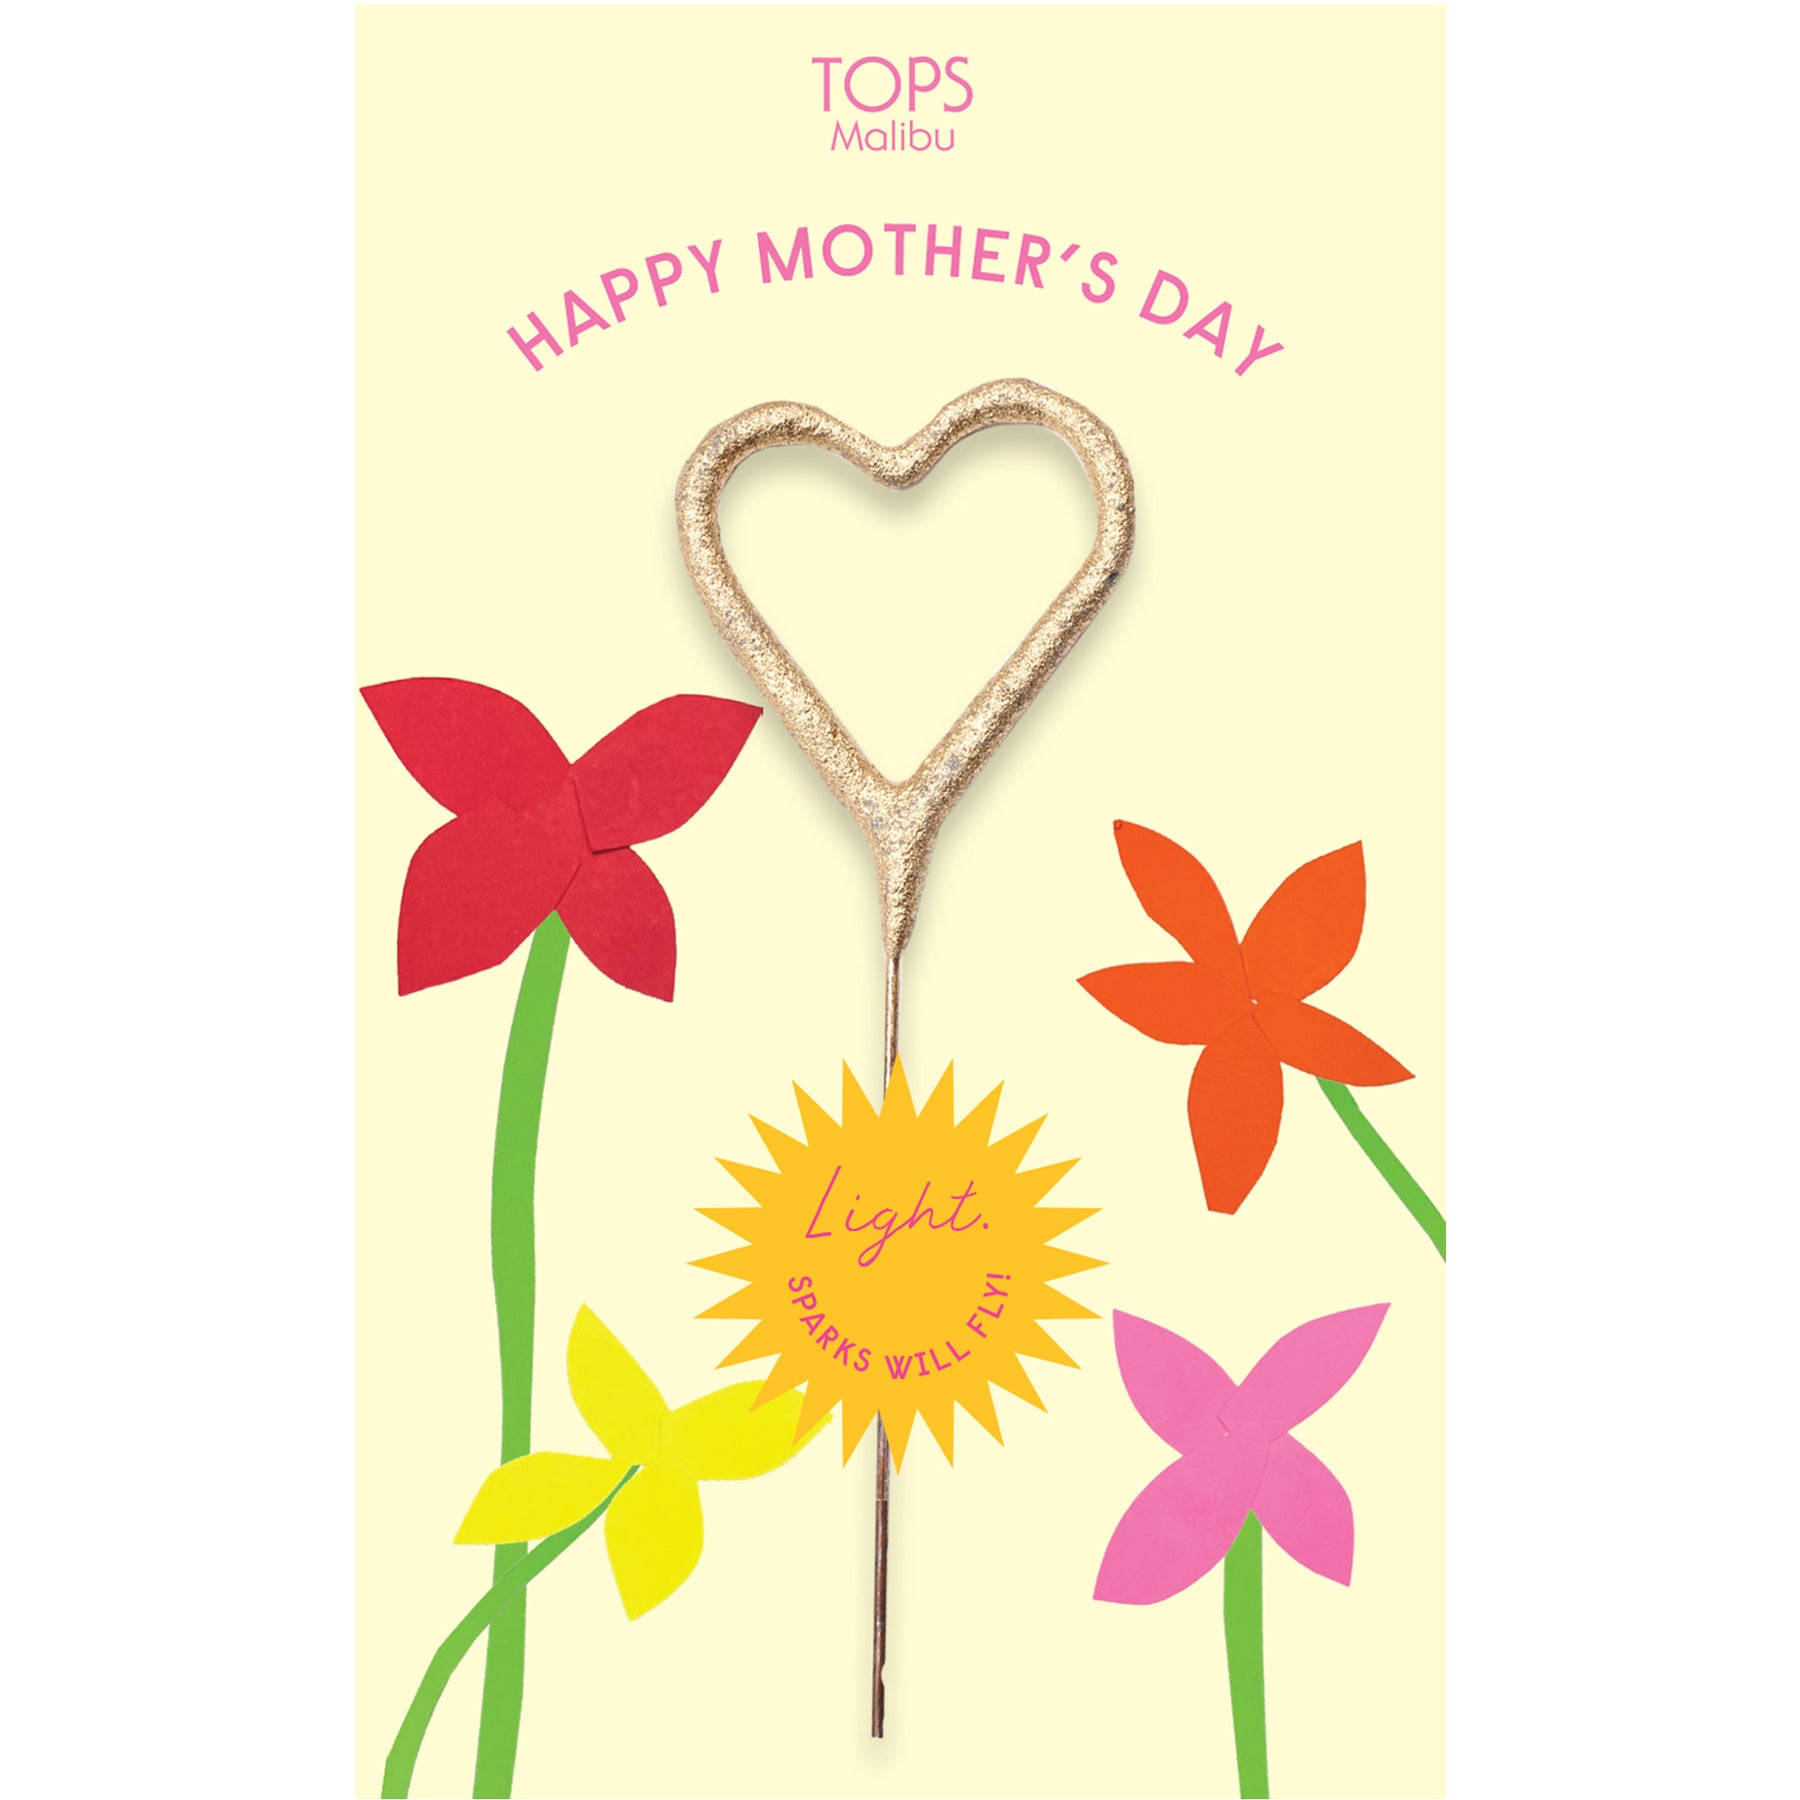   Gift Card - Happy Mother's Day: Gift Cards